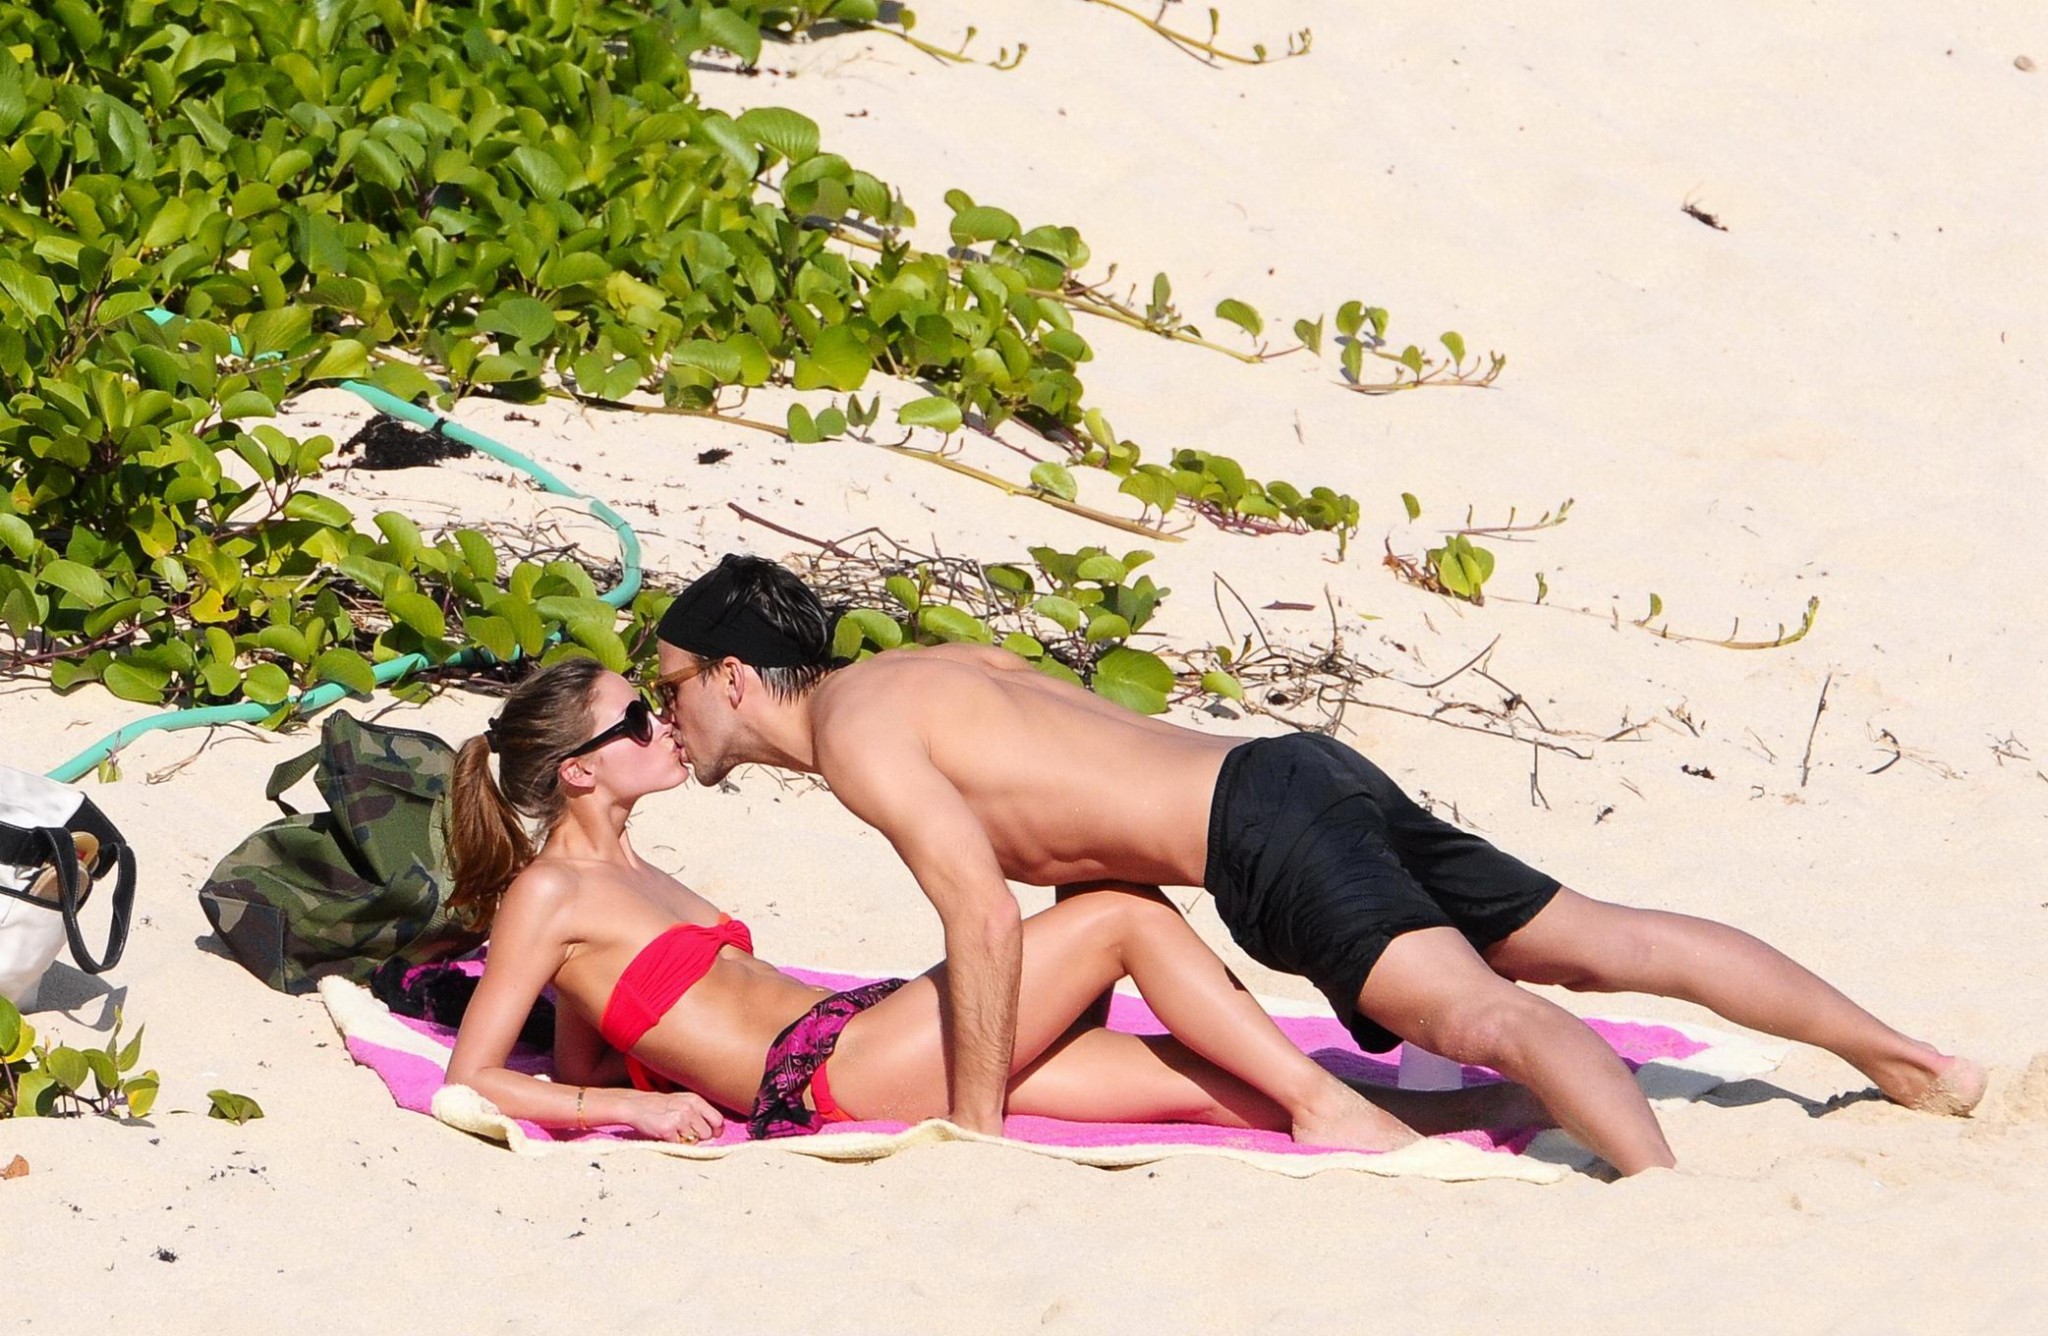 Olivia Palermo in bikini making out with her boyfriend on a beach in St. Barts #75278069